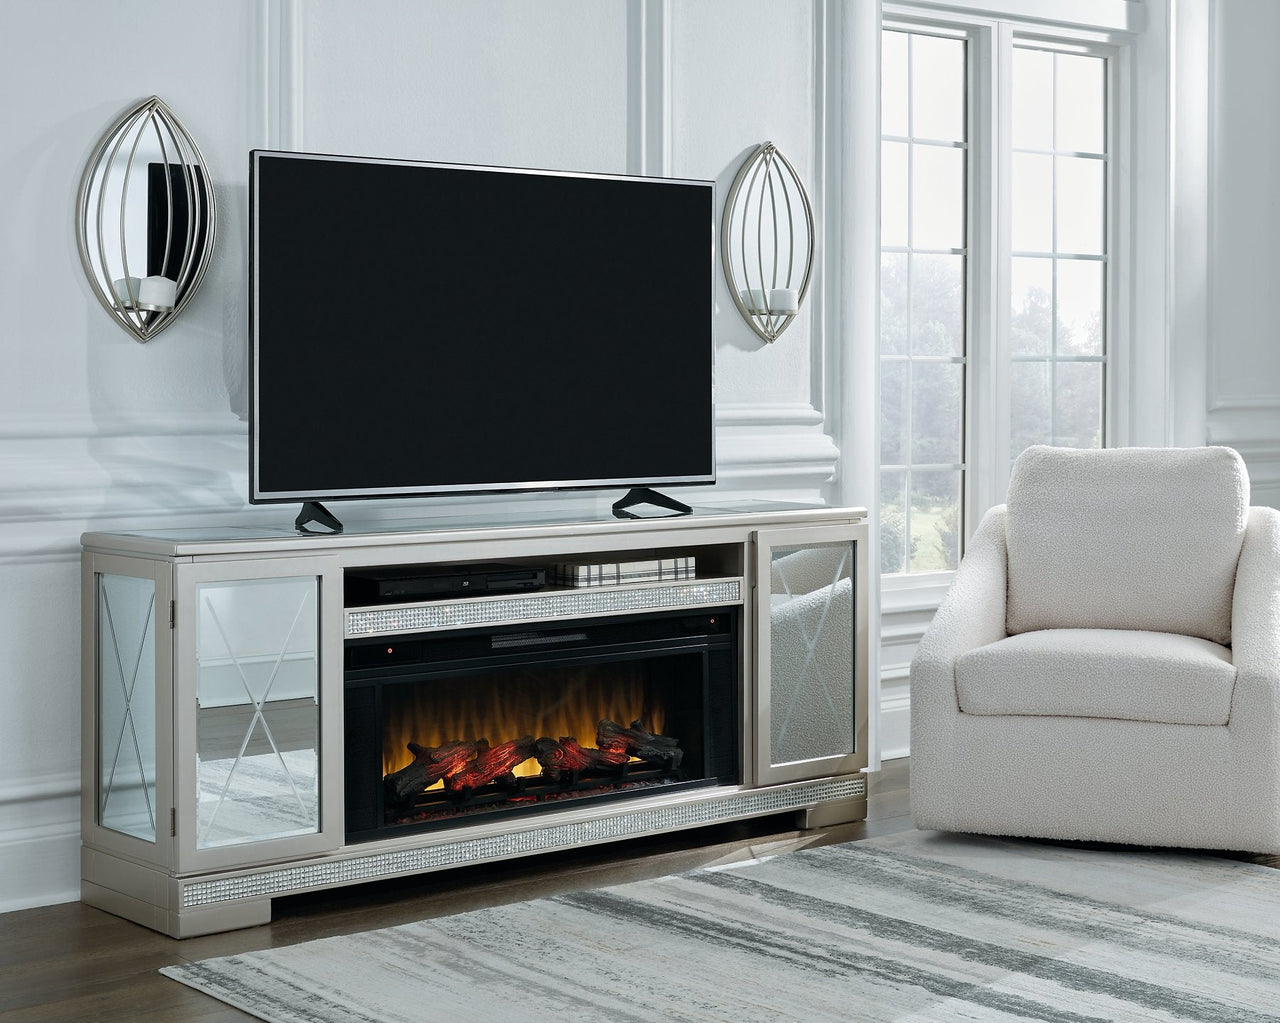 Flamory 72" TV Stand with Electric Fireplace image